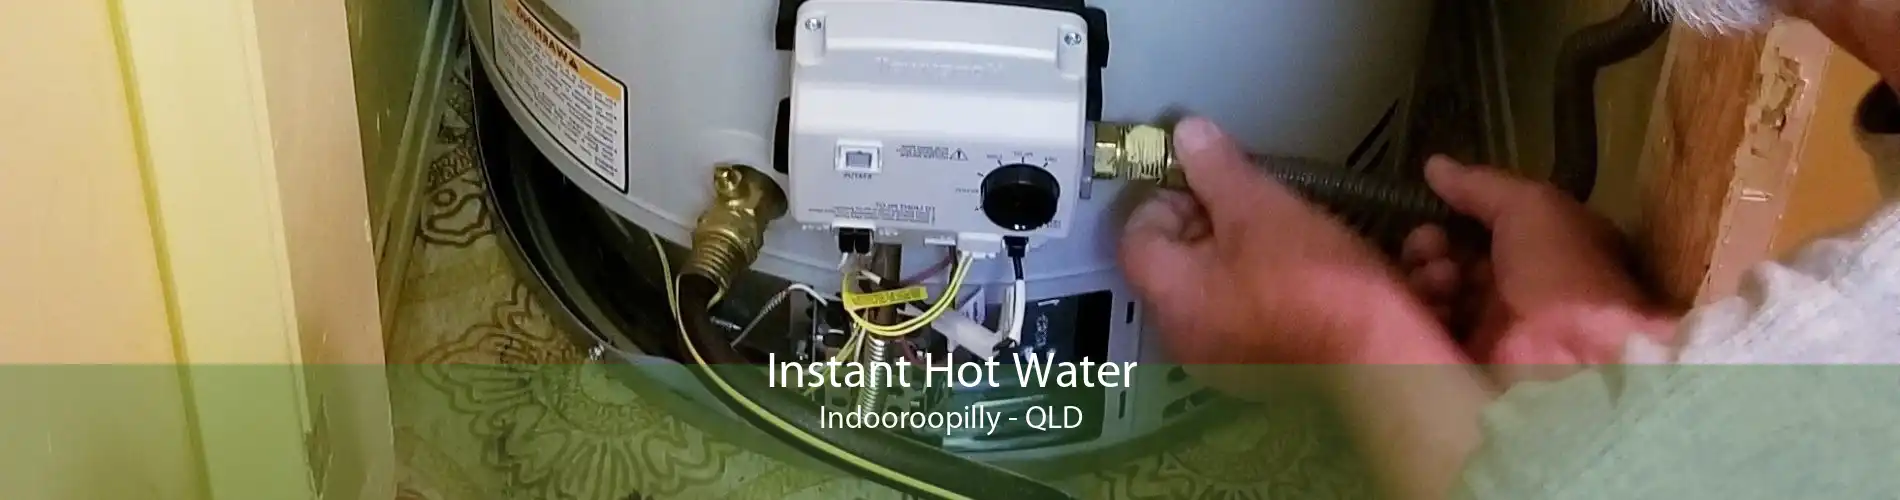 Instant Hot Water Indooroopilly - QLD